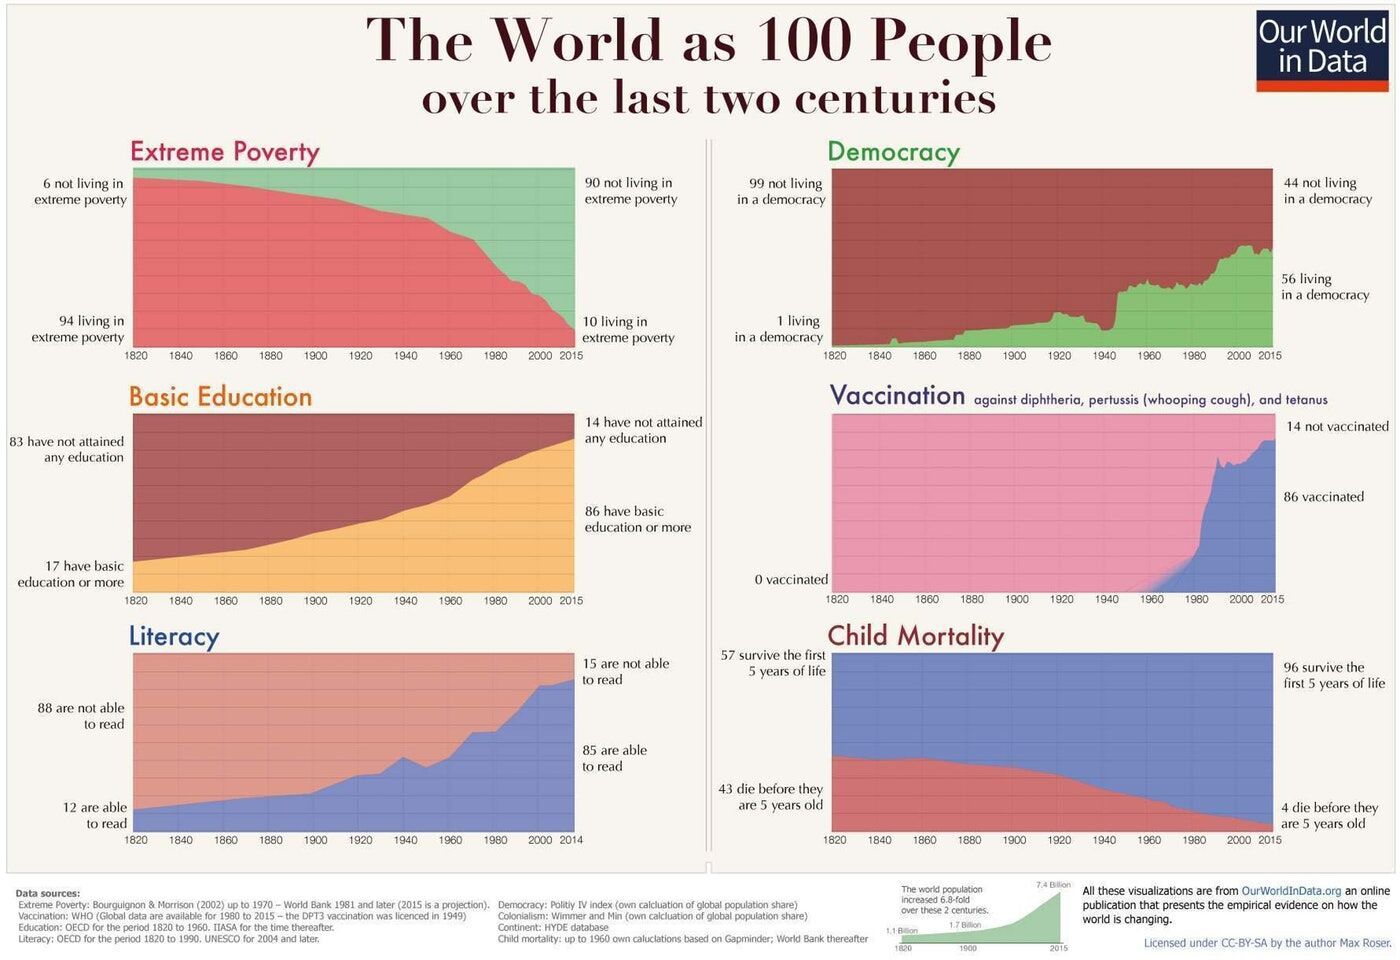 The world as 100 people